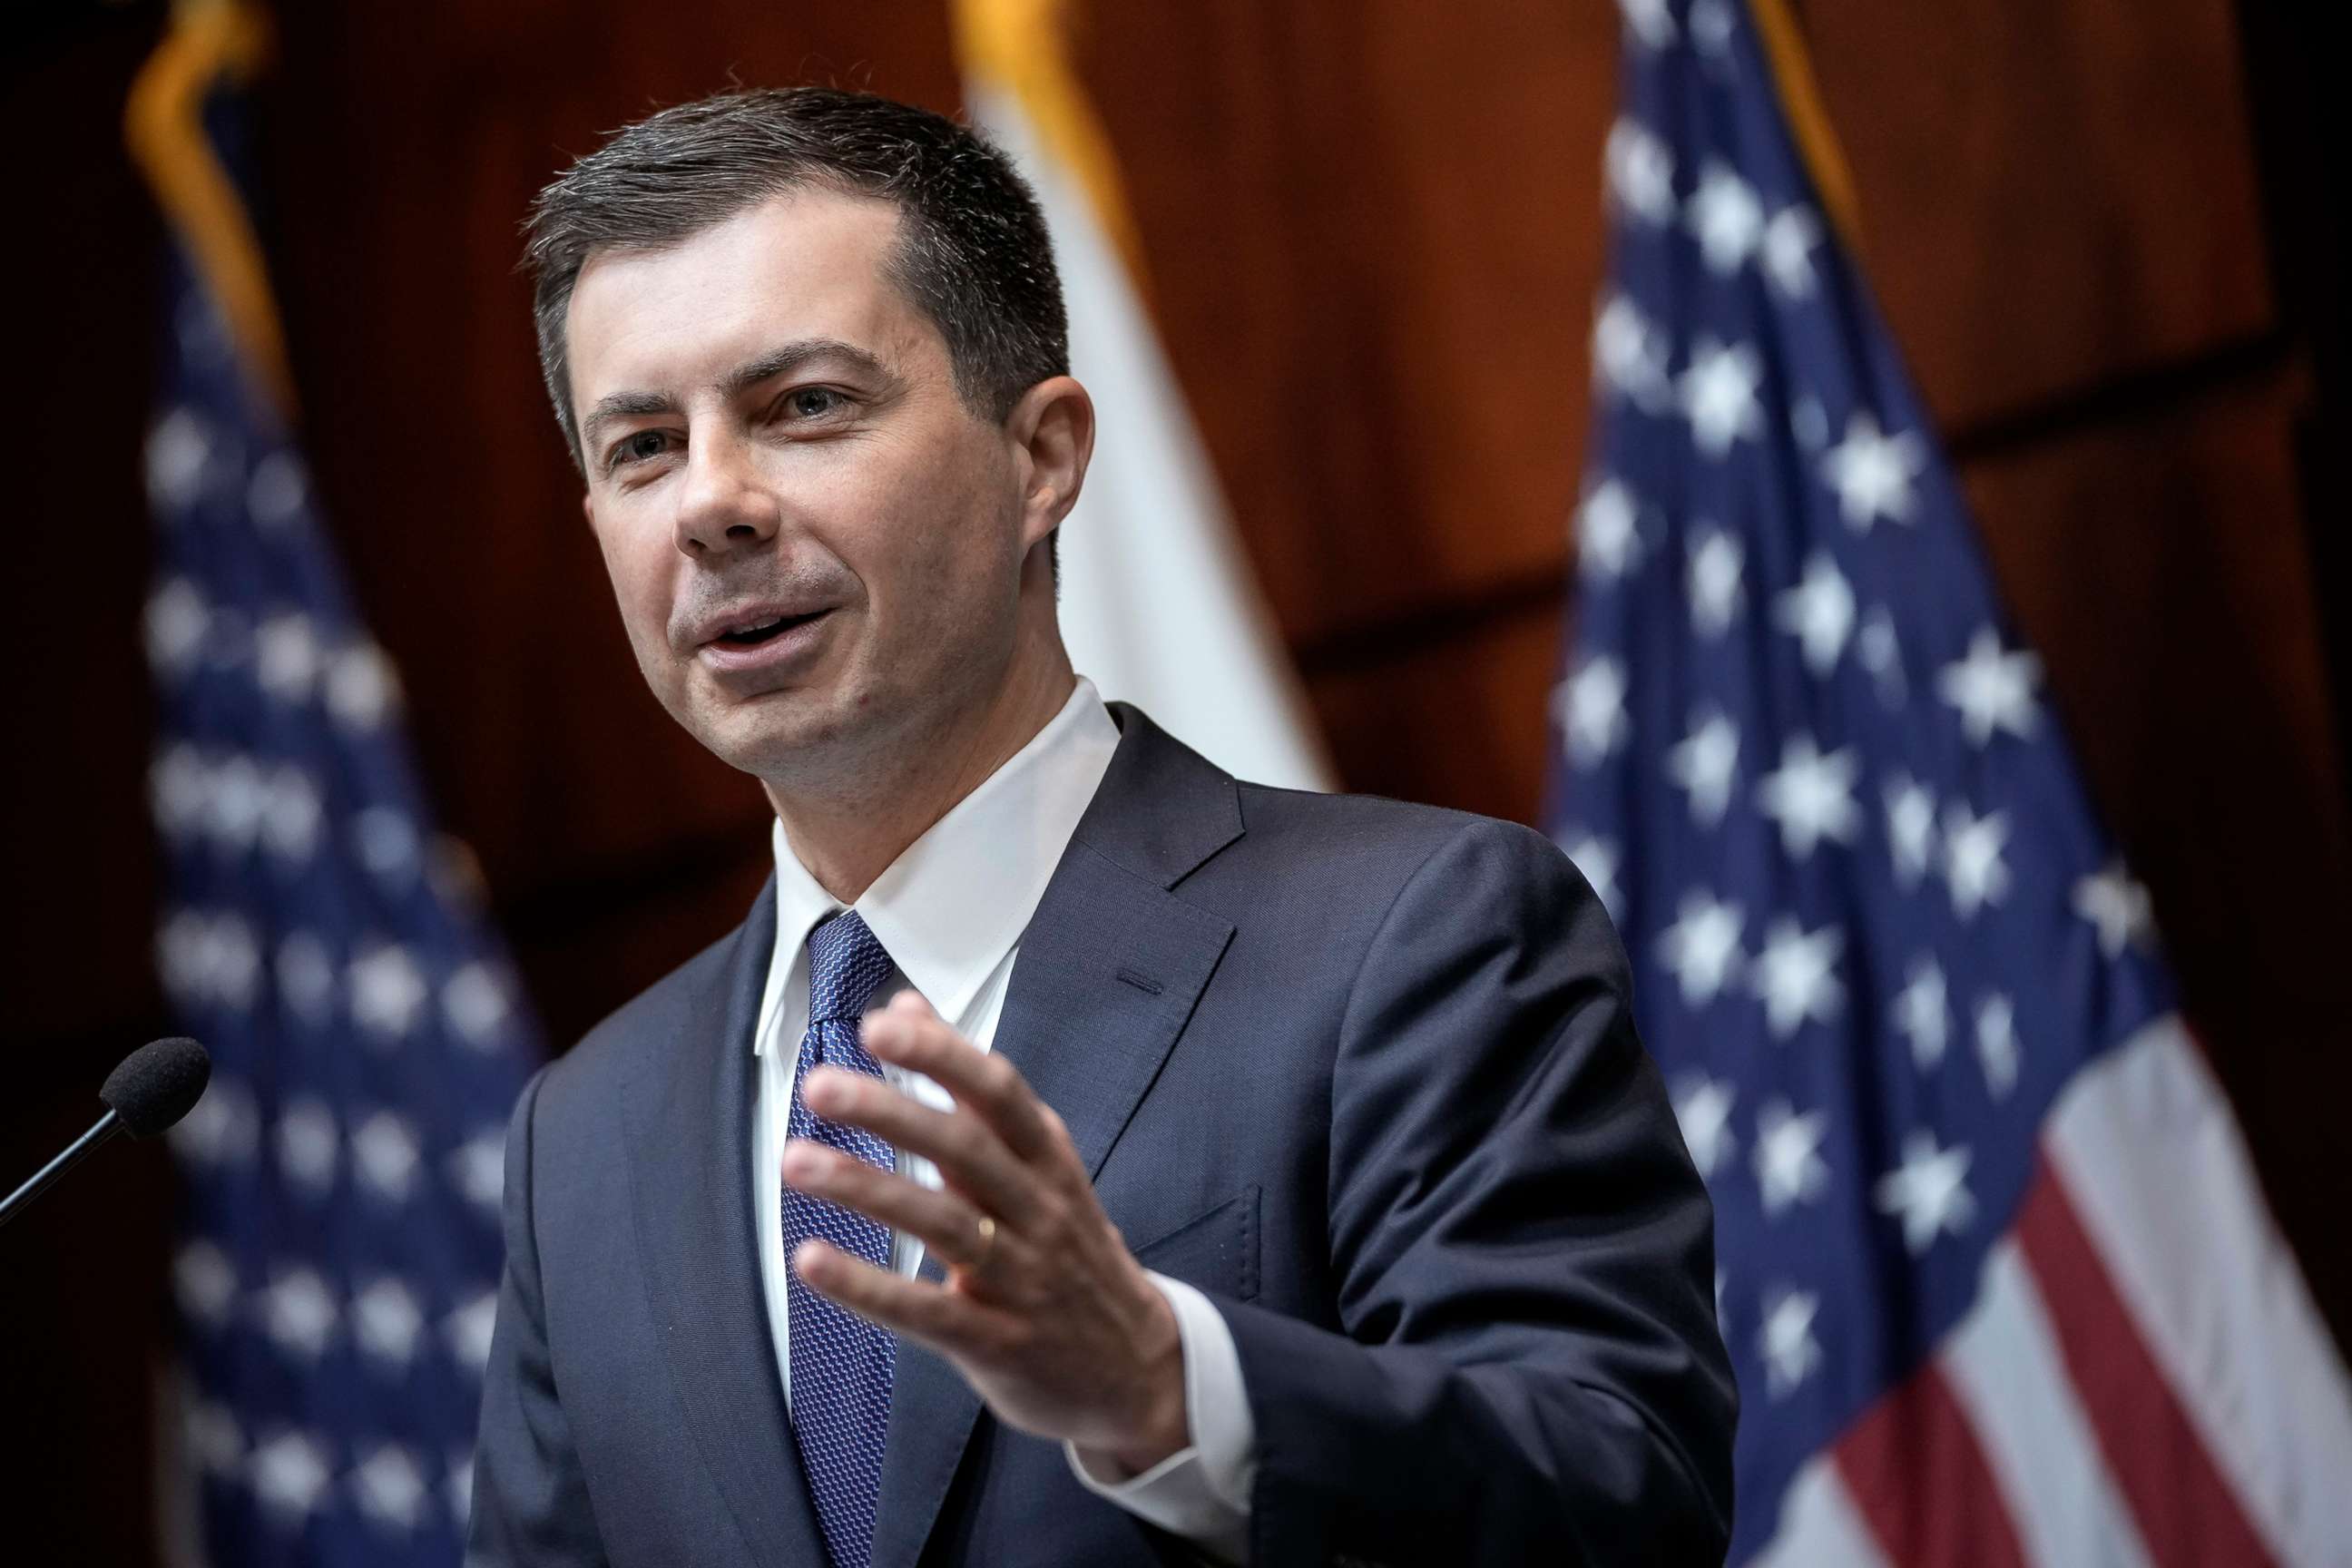 PHOTO: Secretary of Transportation Pete Buttigieg speaks during an event about fuel economy standards at the headquarters of the Department of Transportation, April 1, 2022, in Washington, D.C.